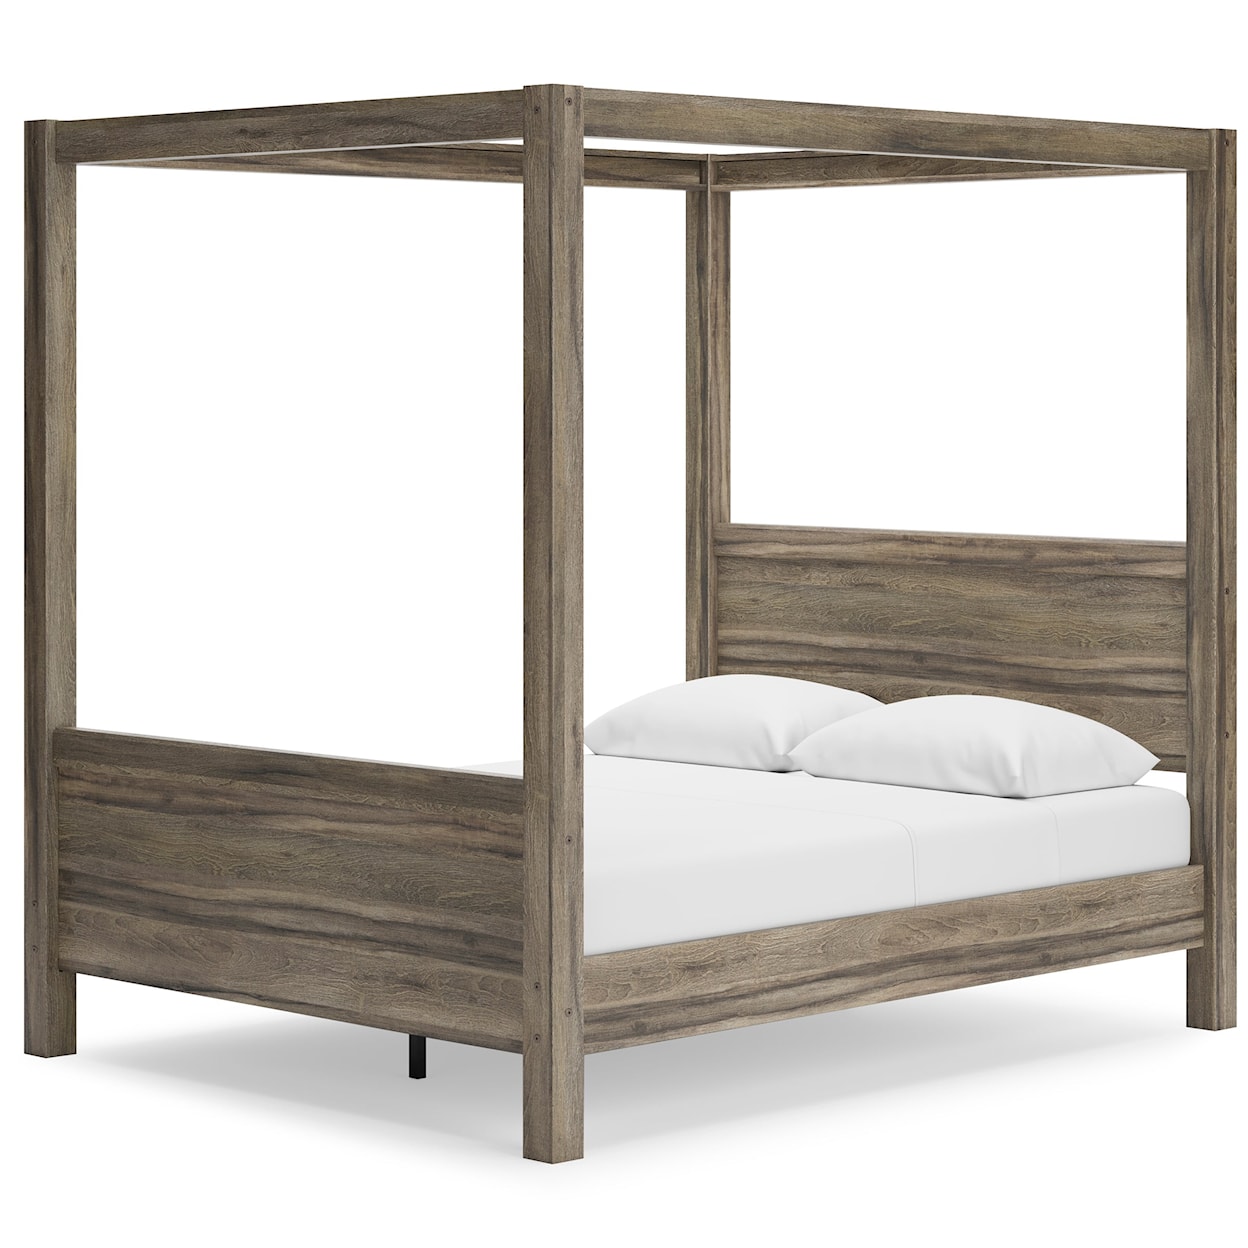 Signature Design by Ashley Shallifer Queen Canopy Bed